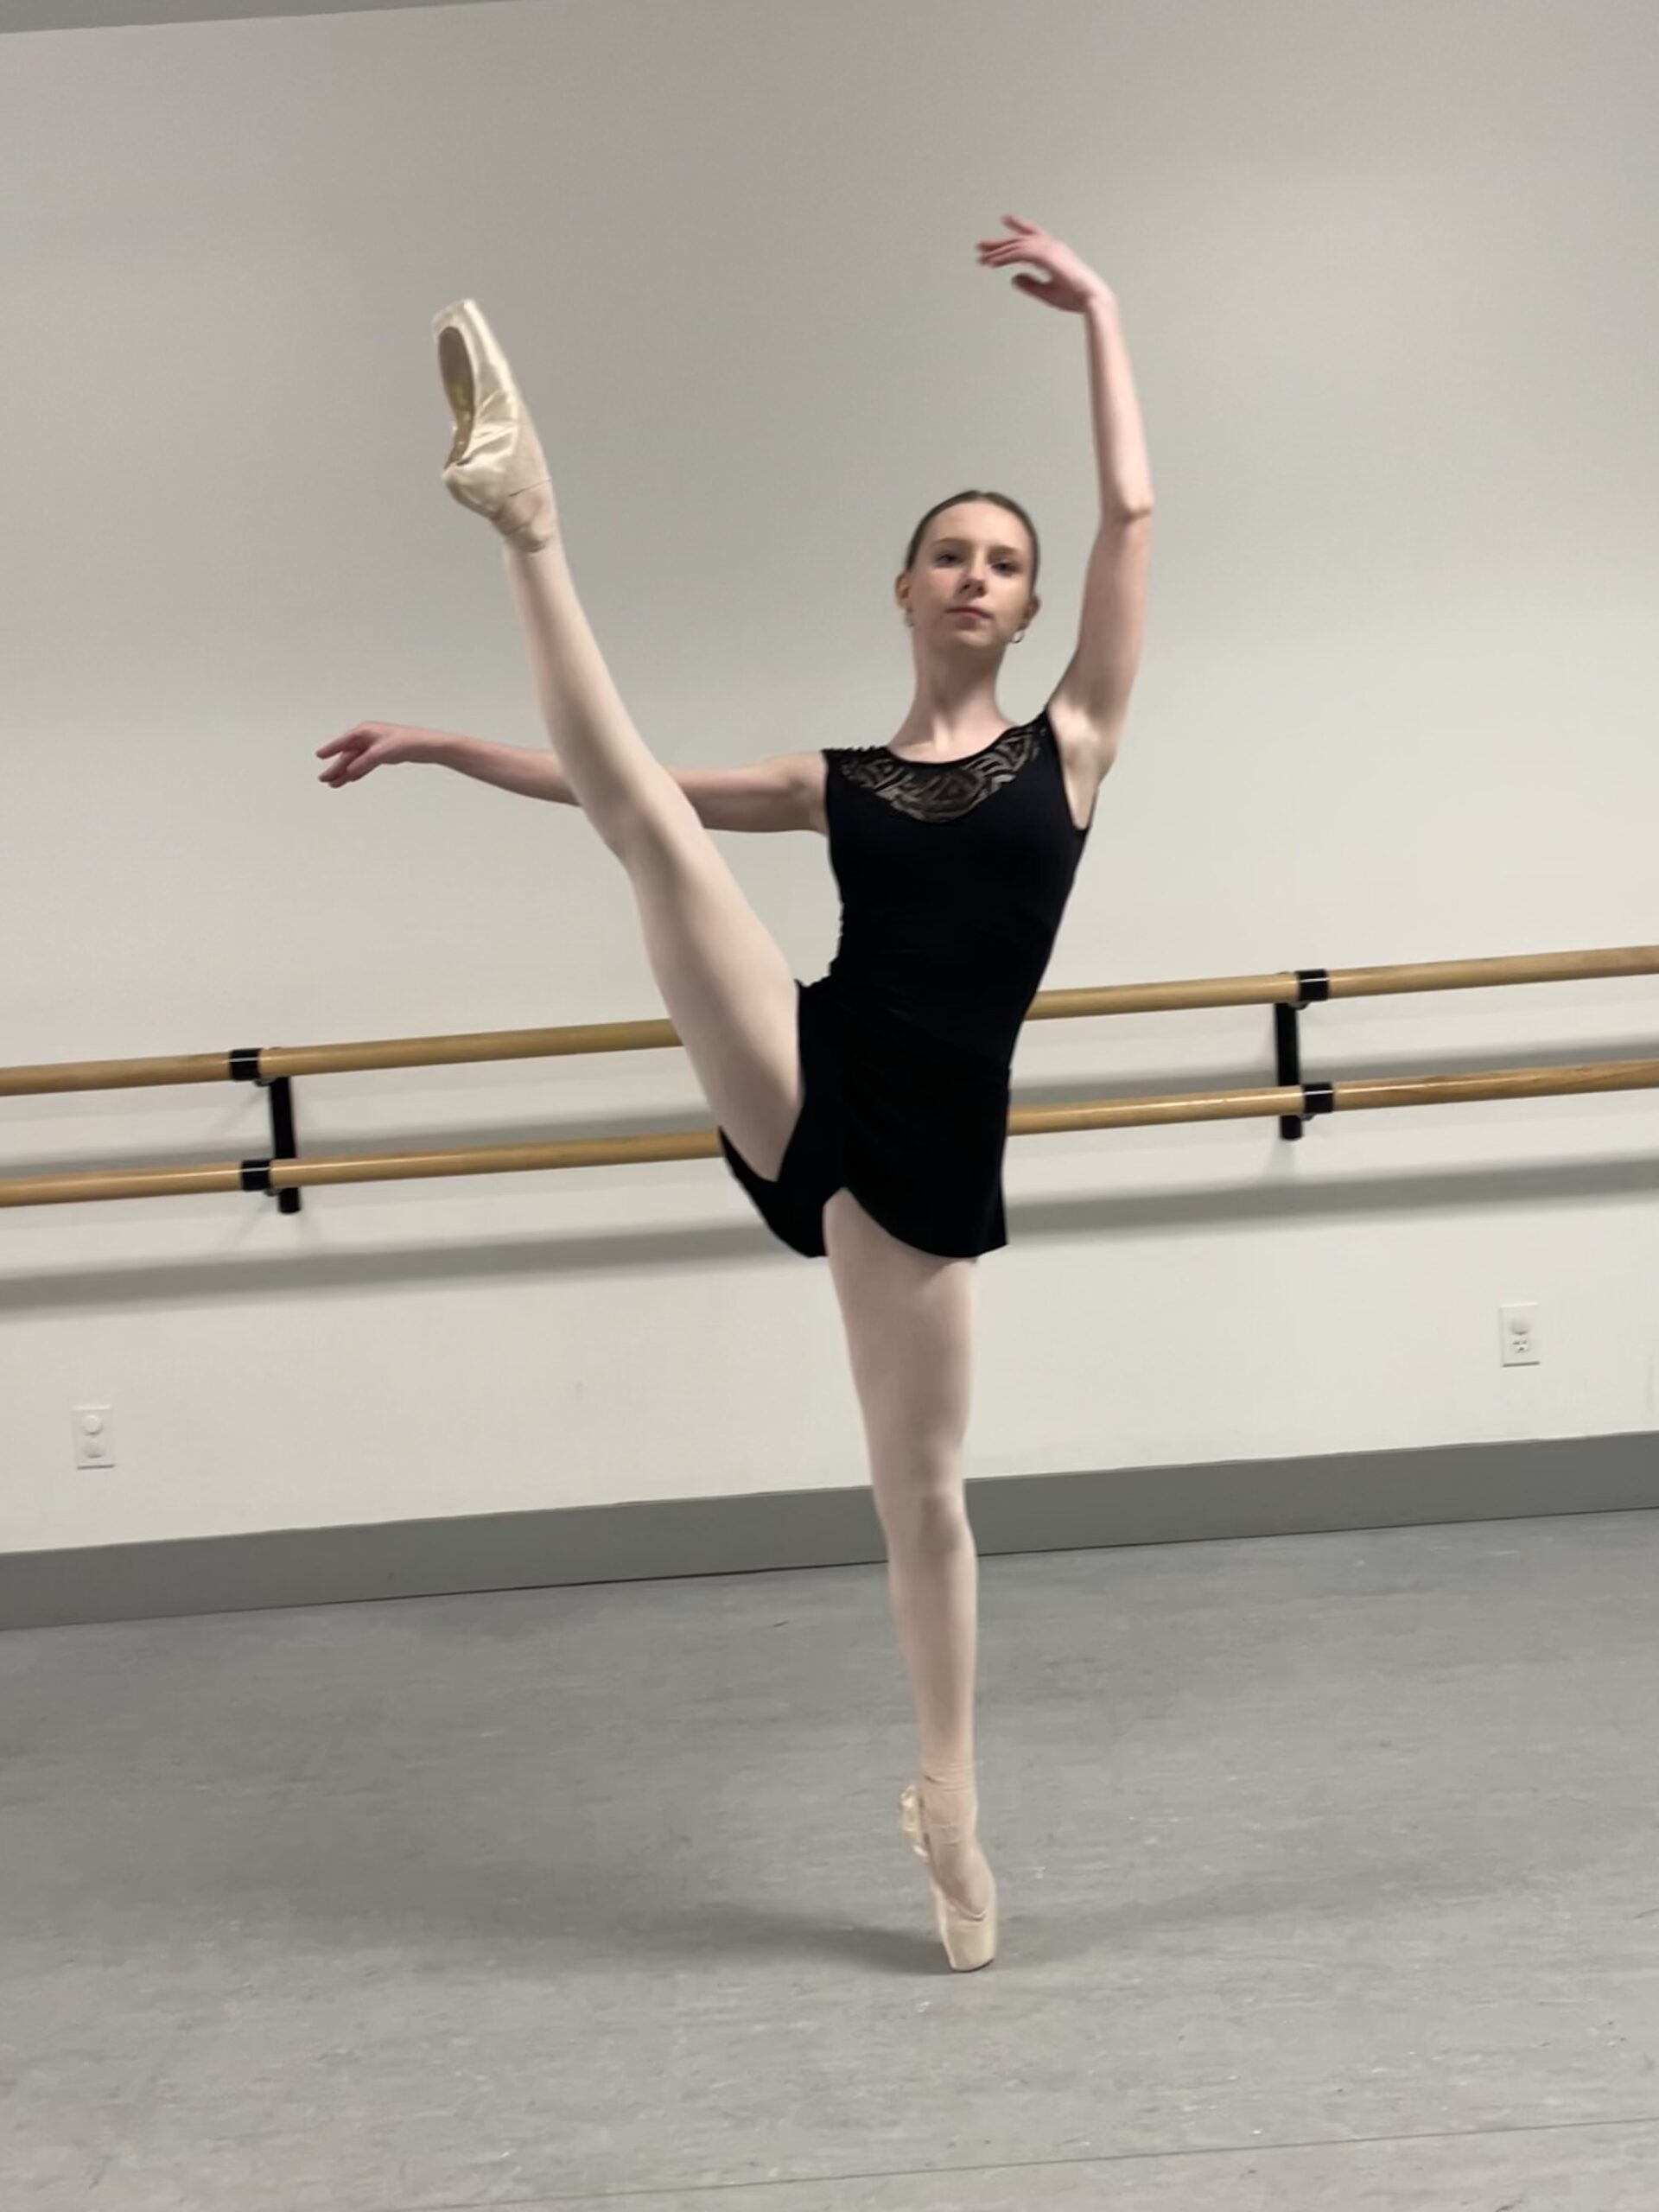 East Hampton High School junior Maya Leathers will share the role of the Sugar Plum Fairy with two fellow ballerinas in Studio 3's production of the Nutcracker this holiday season. JENNIFER VAN ARSDALE